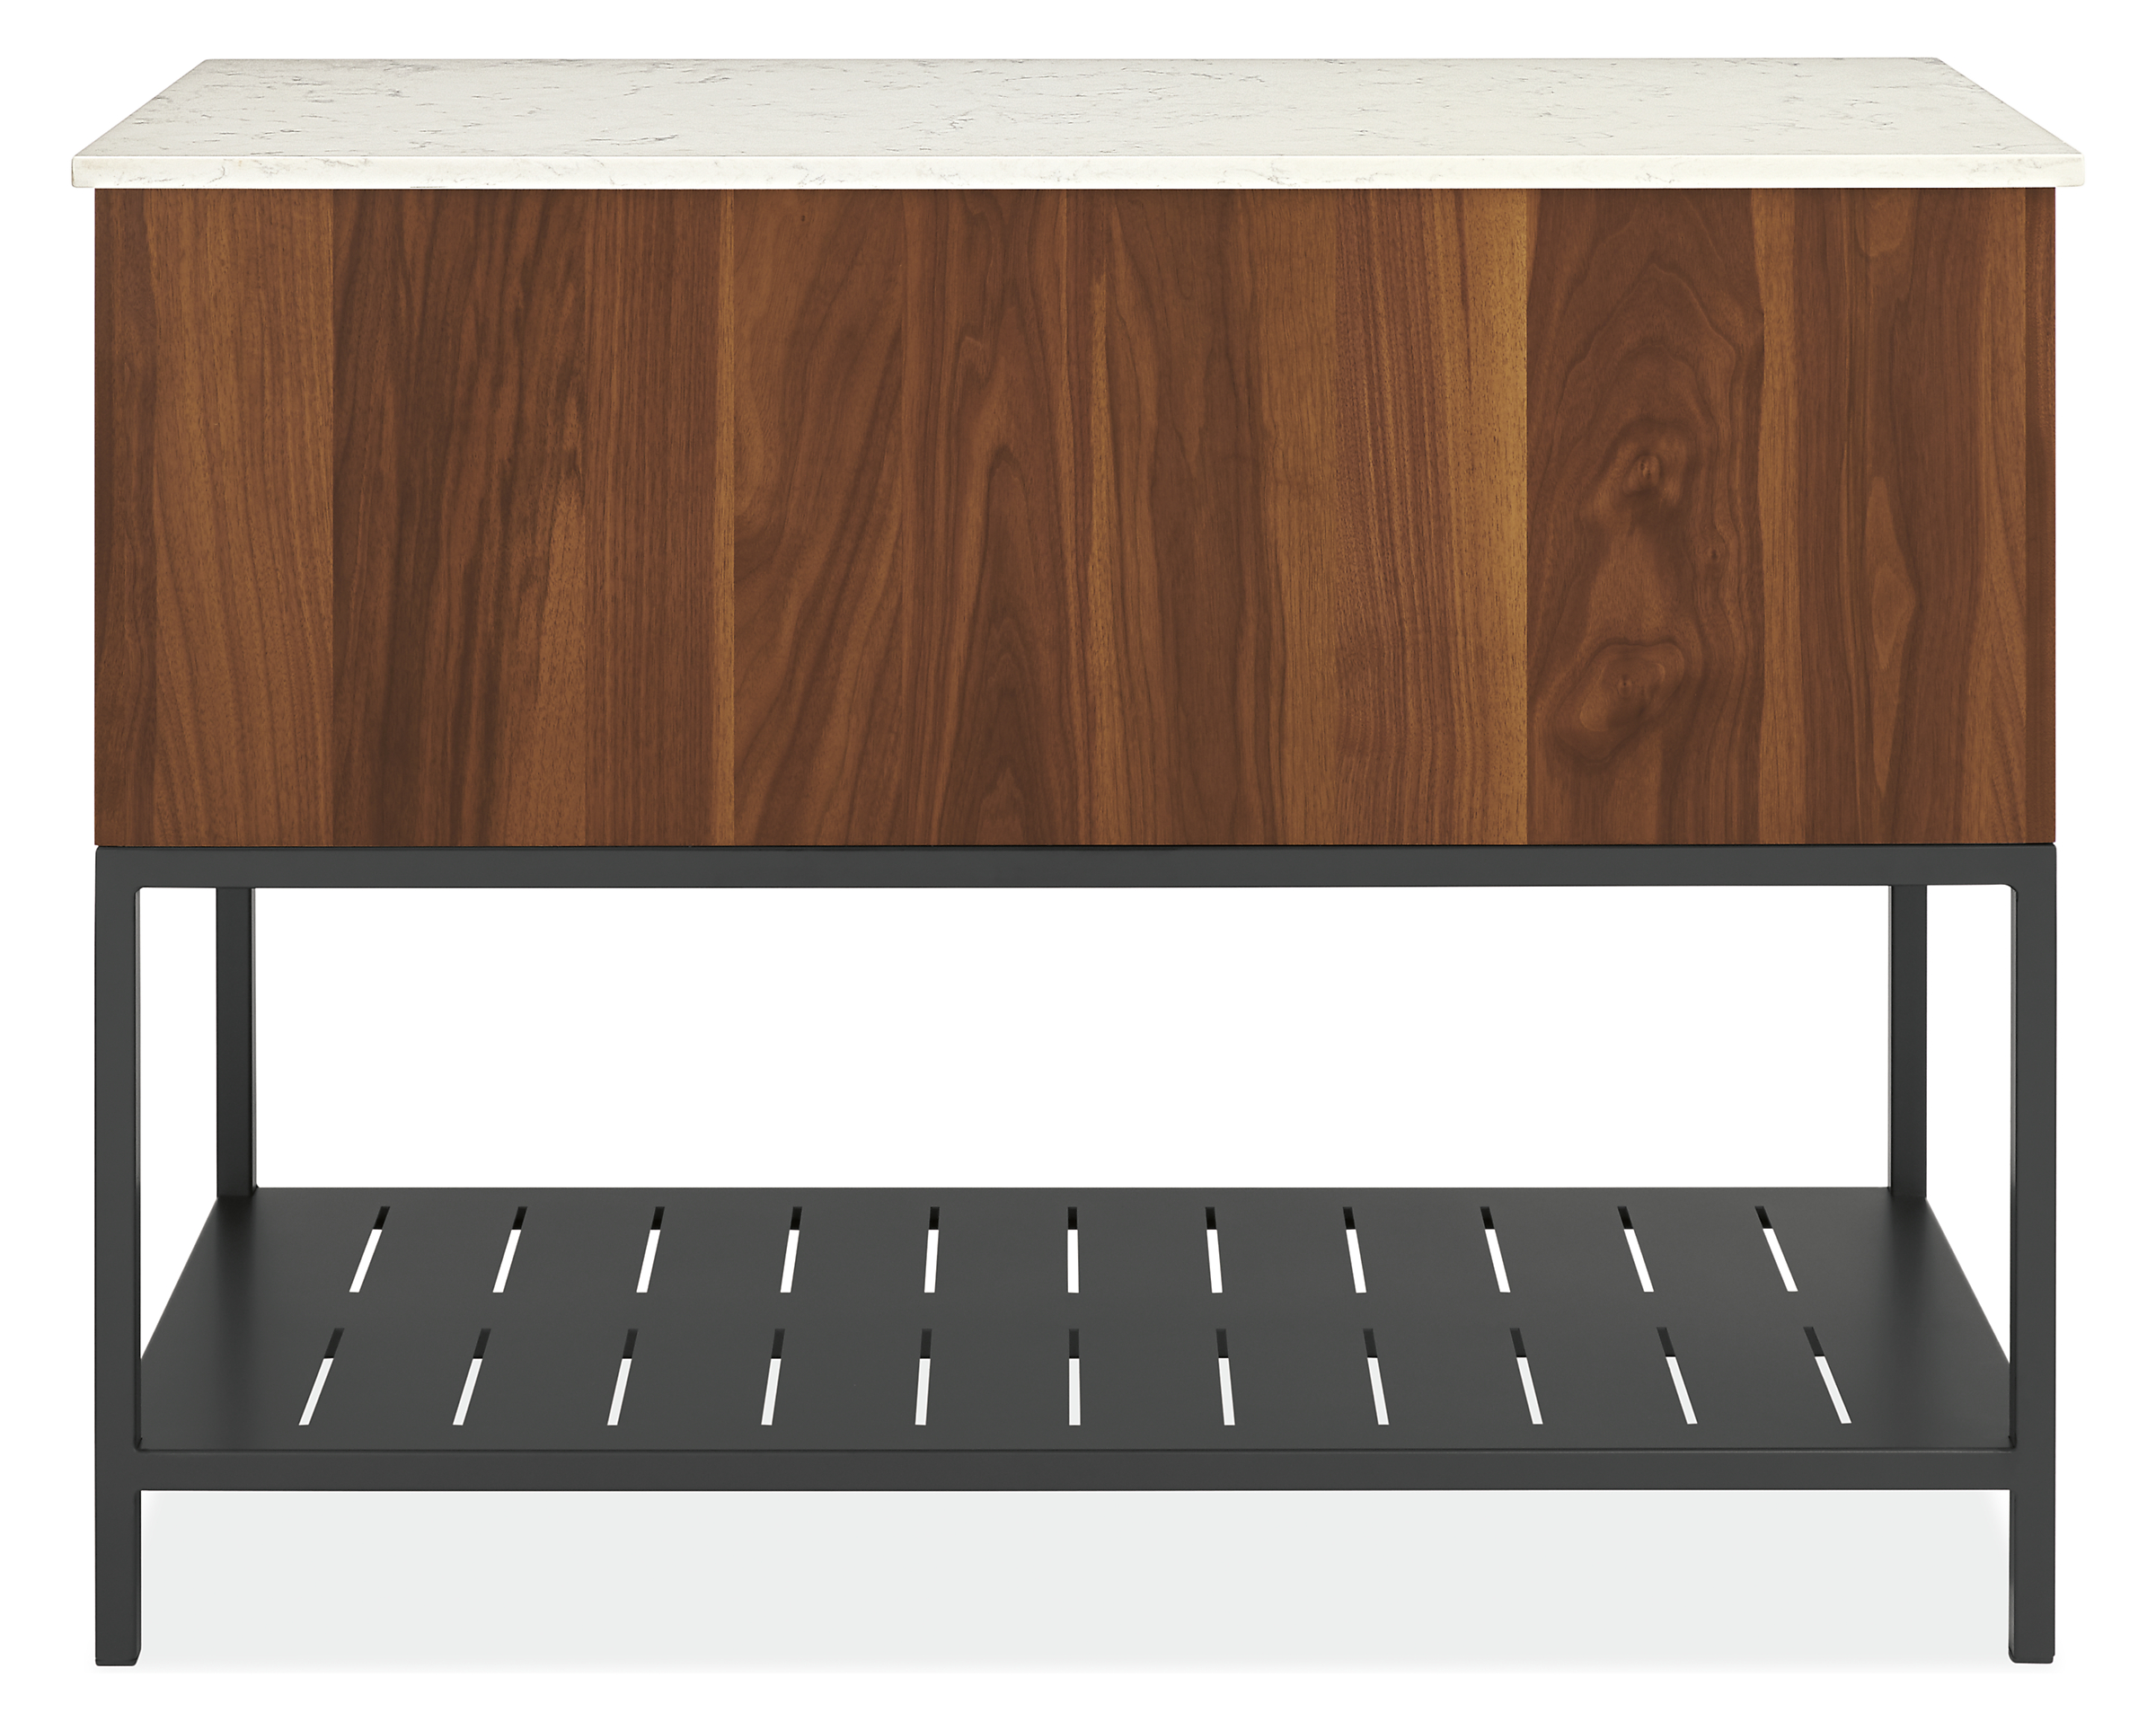 Back view of Booker 48-wide Four-Drawer Kitchen Island with Full Shelf in Walnut with Marbled White Quartz top.